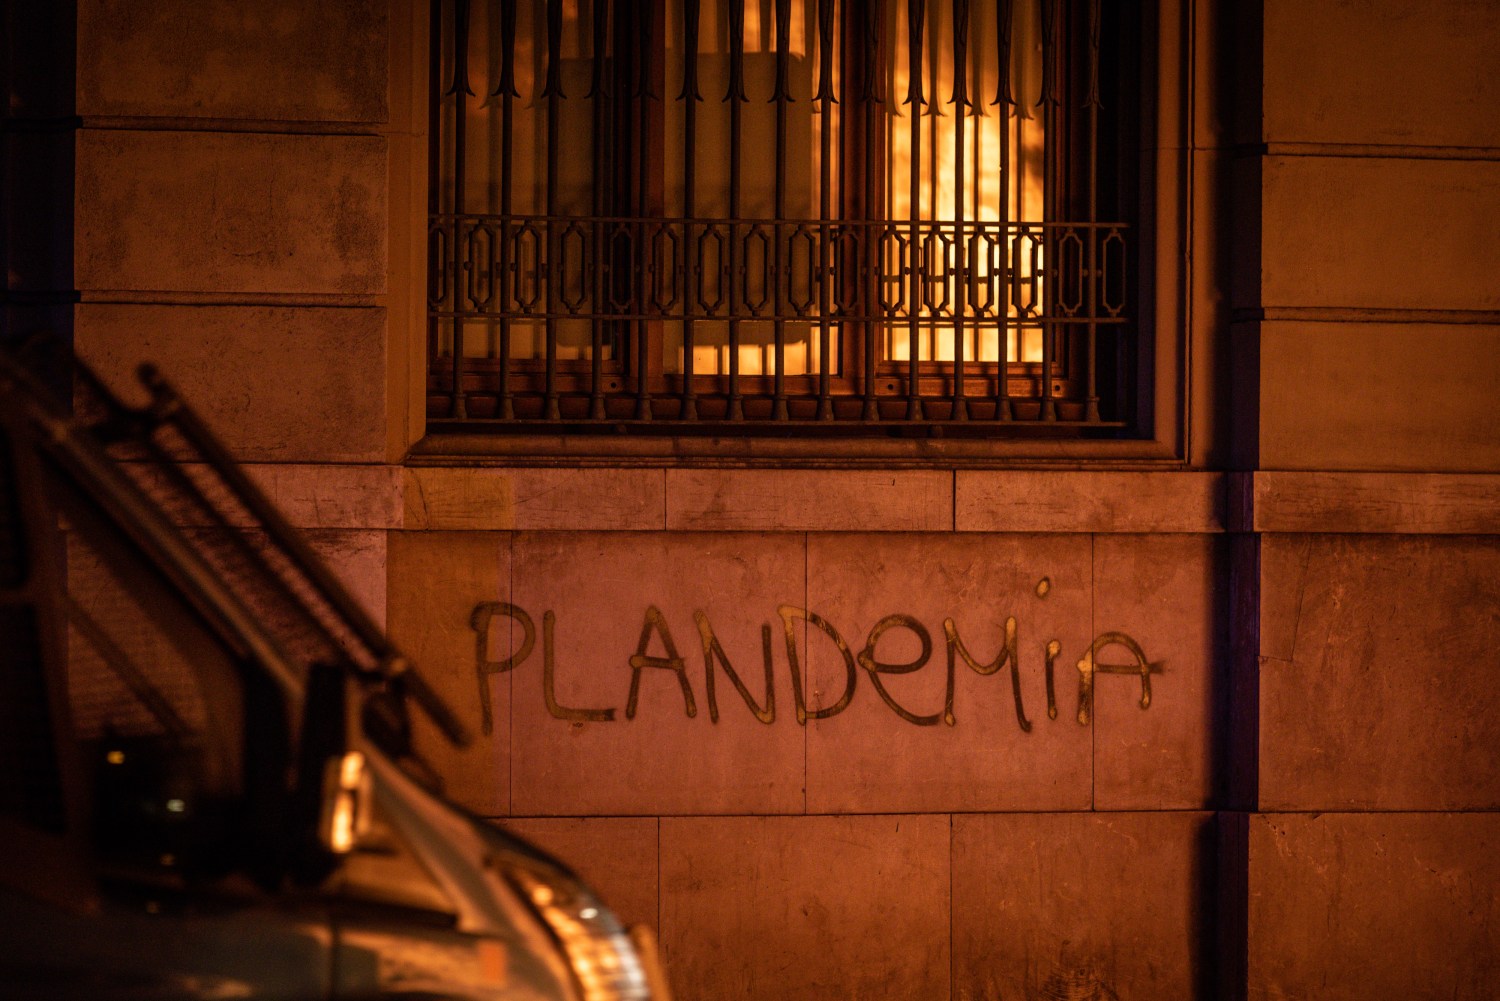 The word "plandemic" is painted on a wall in Barcelona, Spain, in protest against COVID-19 restrictions imposed by the Spanish government.